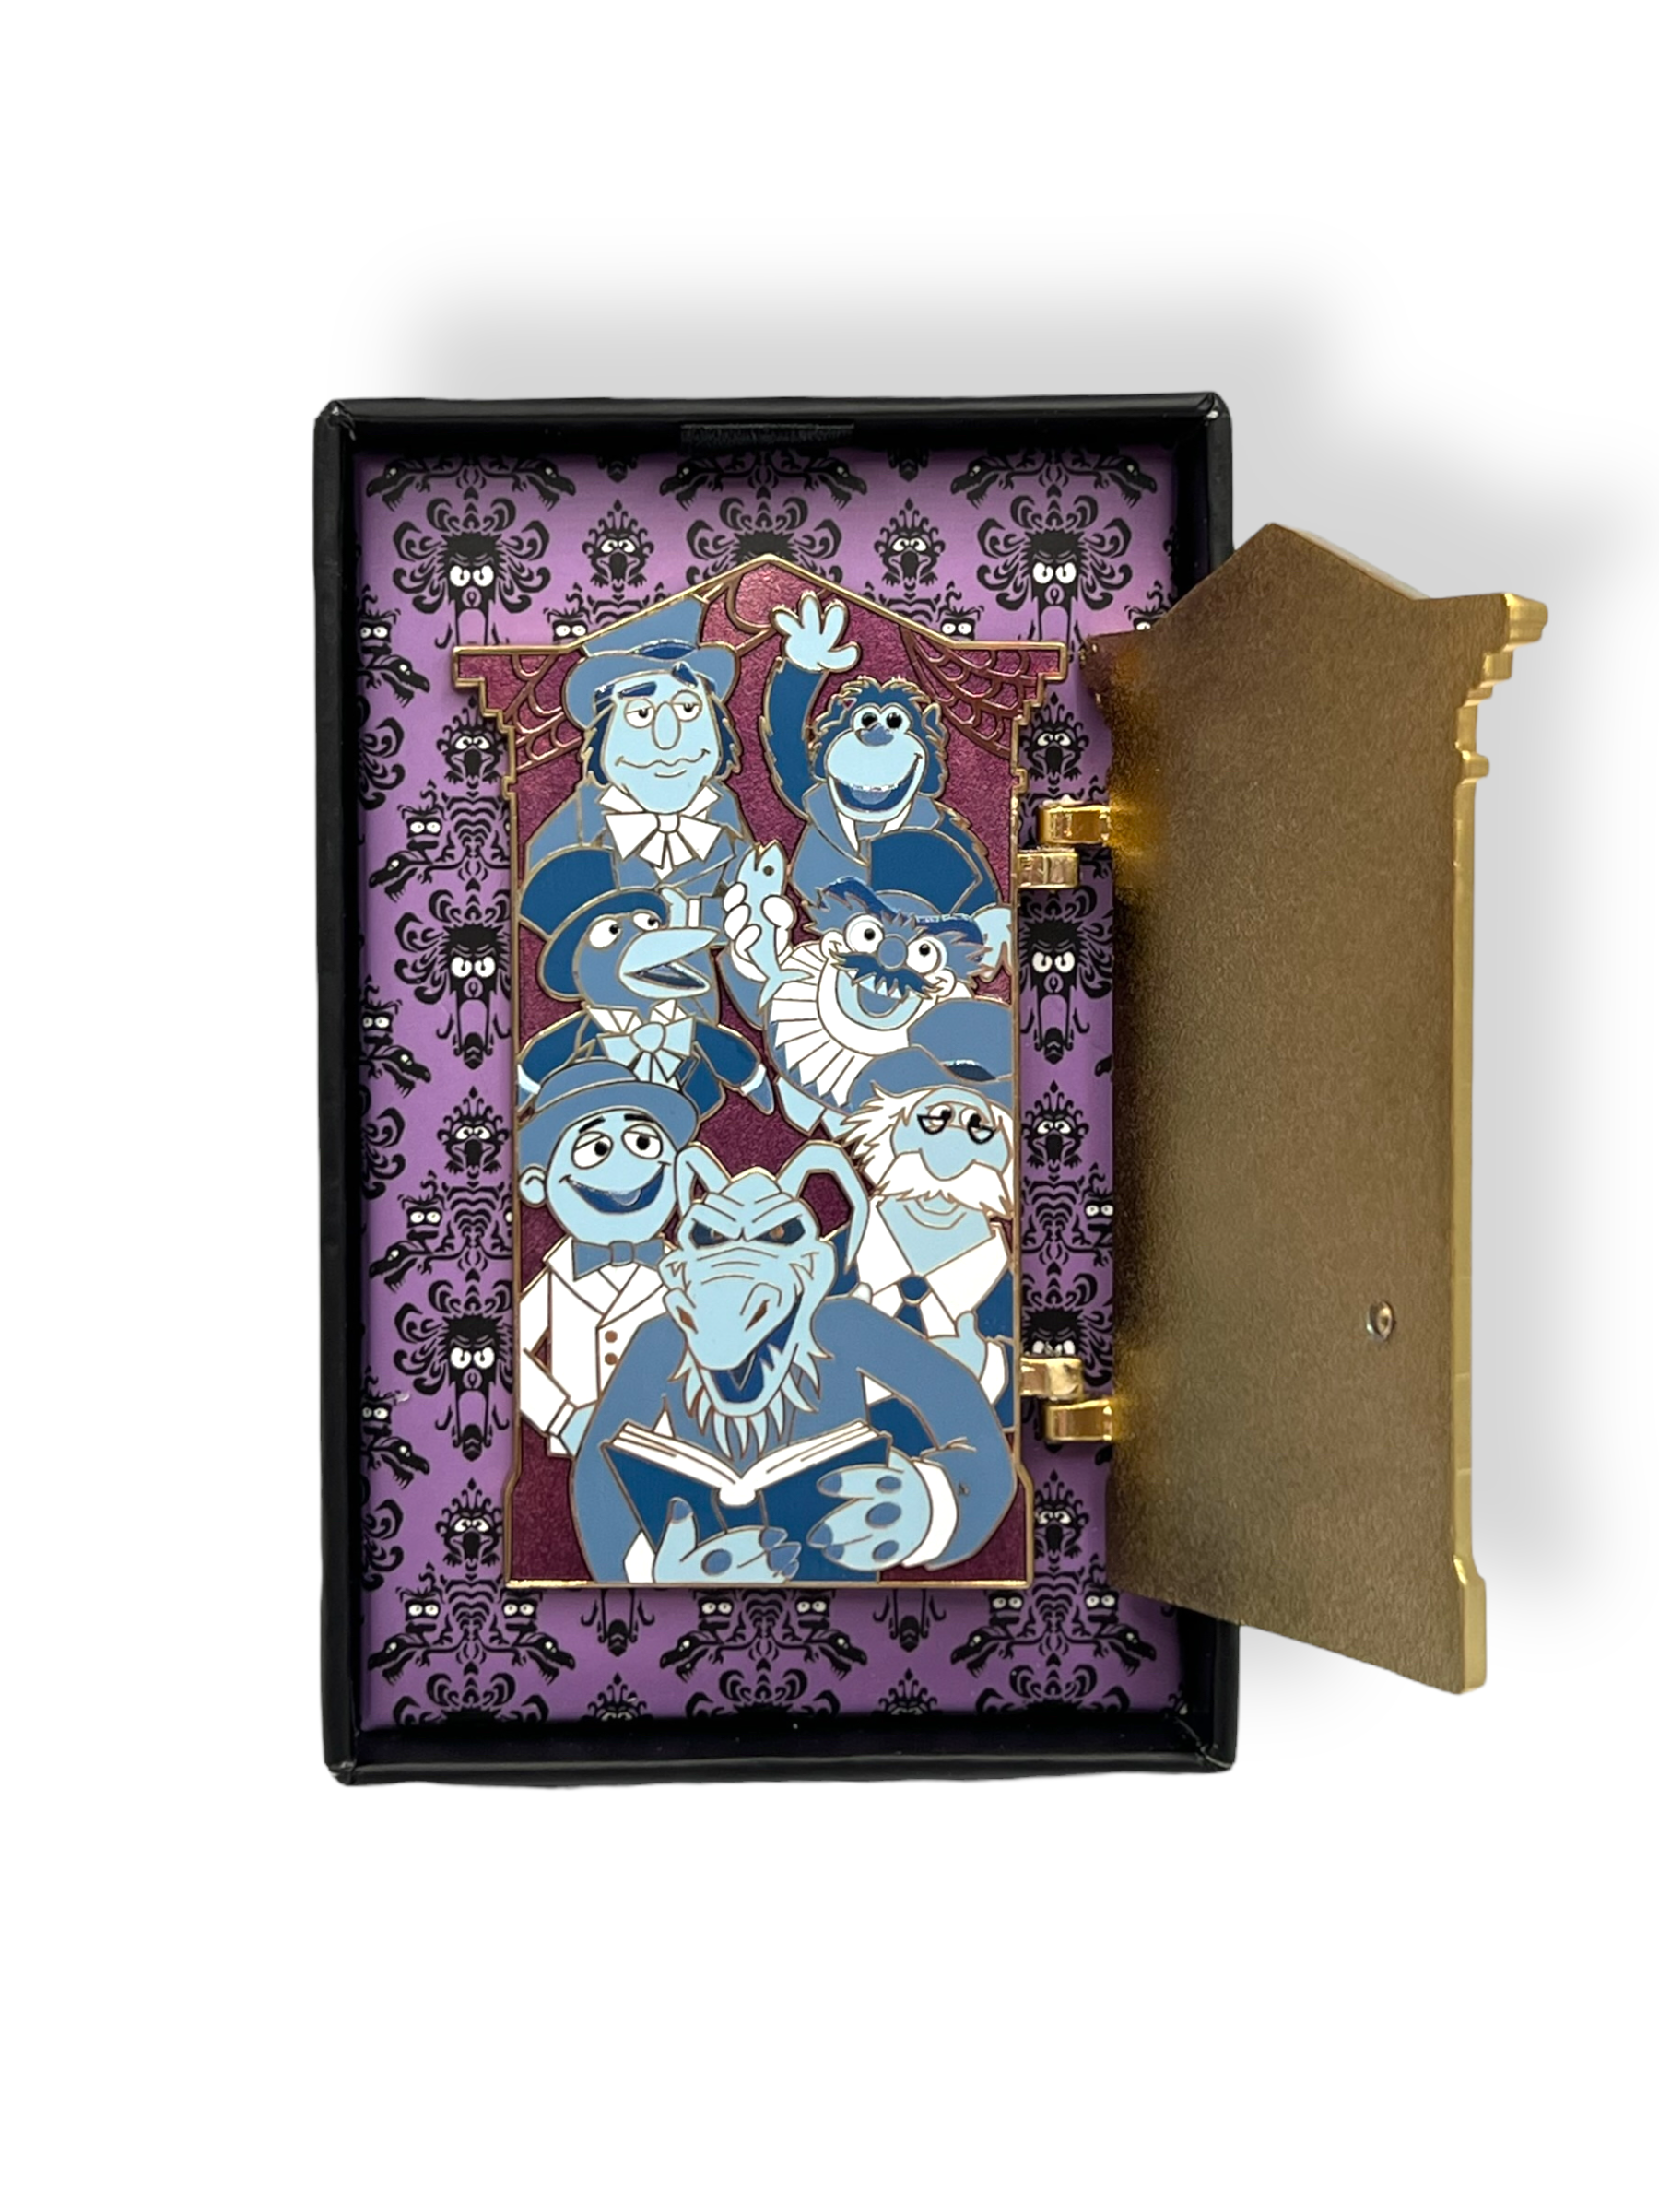 Muppets Haunted Mansion Door Series - Uncle Deadly and Grooms Pin